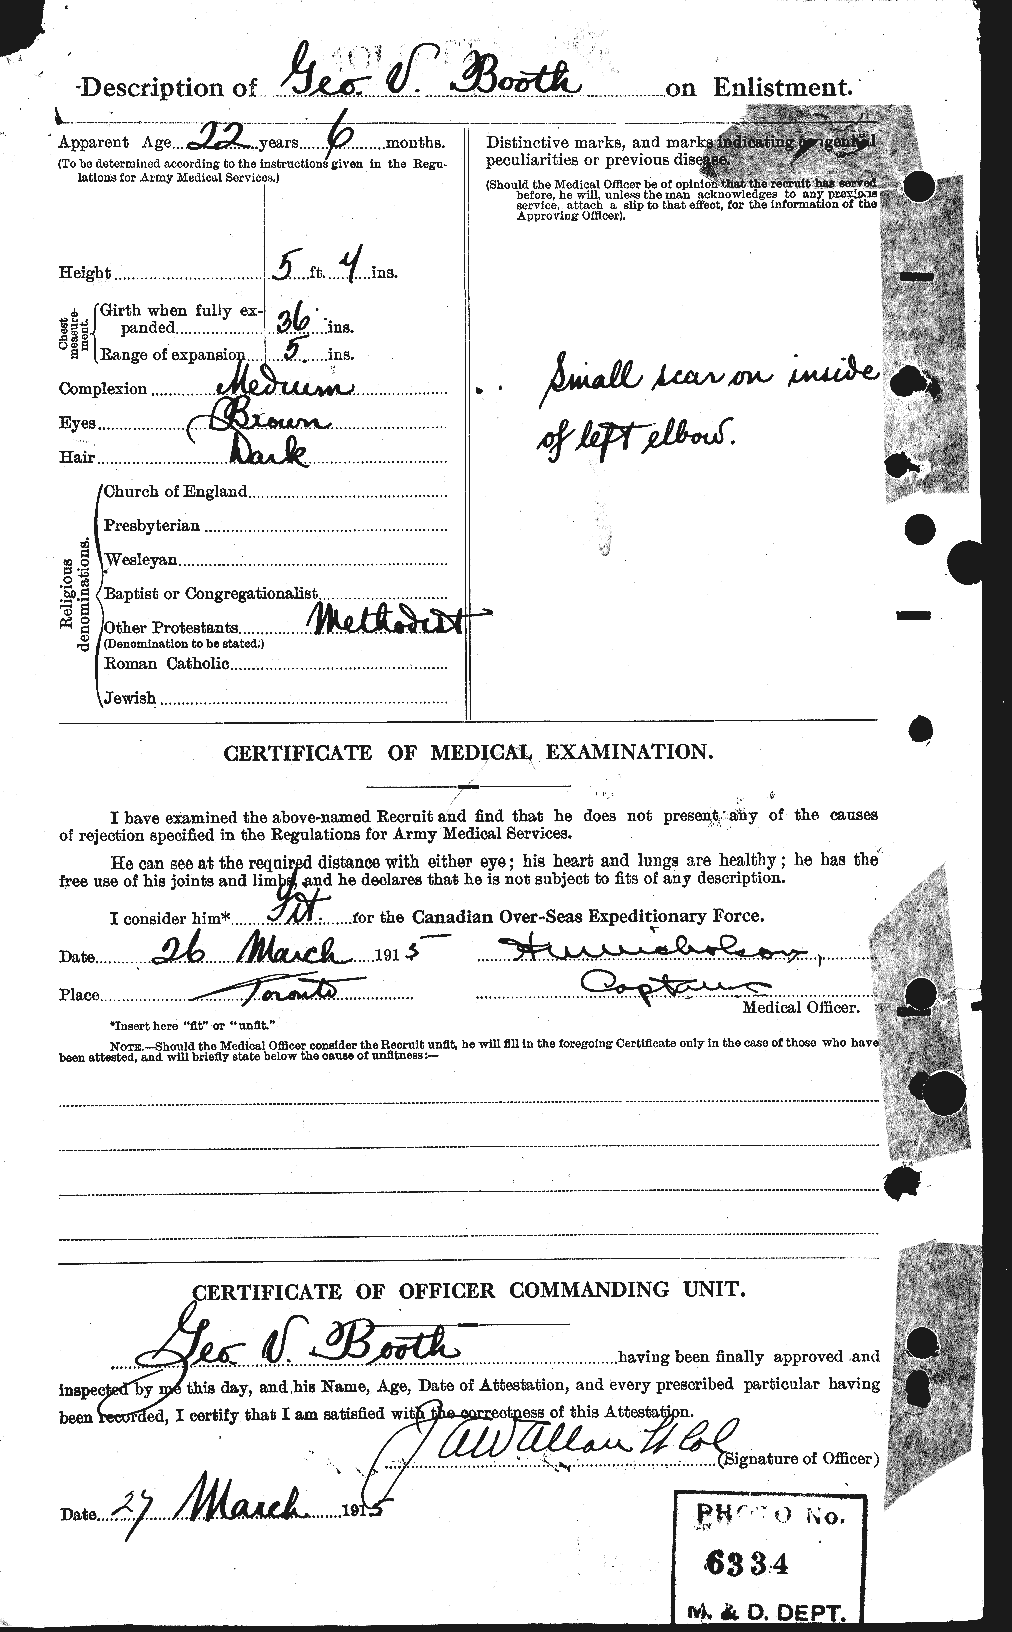 Personnel Records of the First World War - CEF 250866b